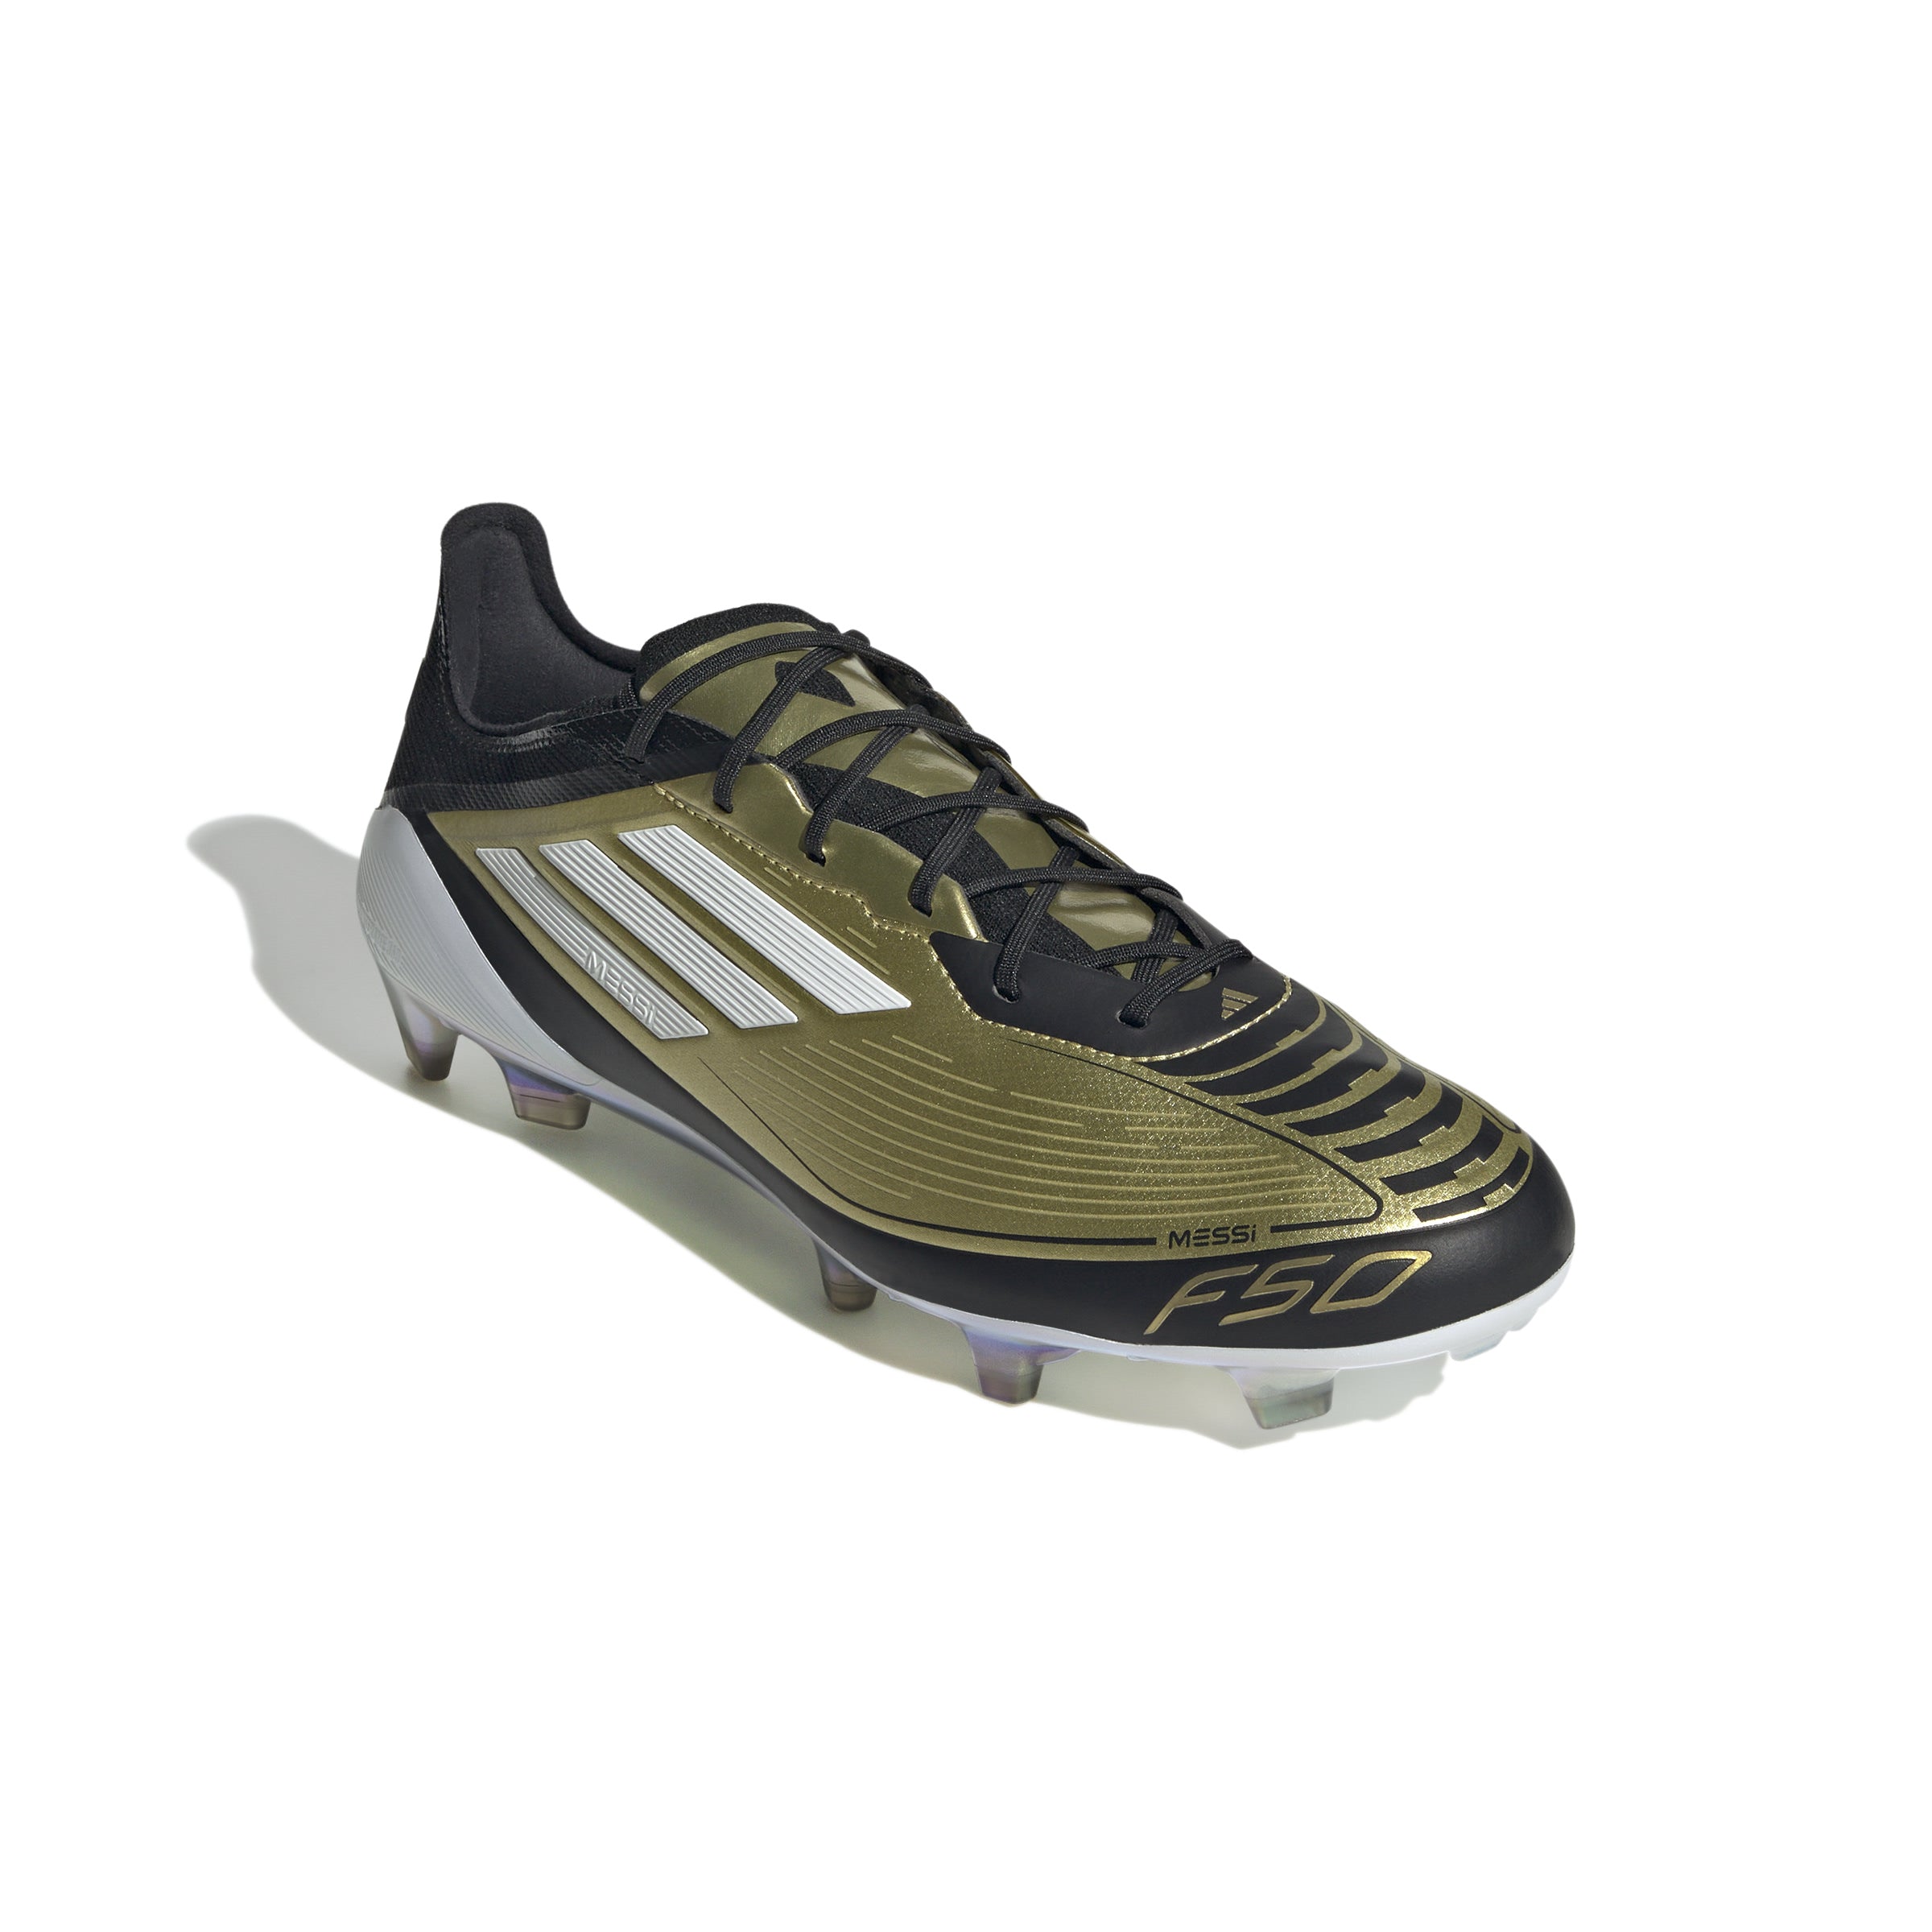 adidas F50 Elite FG Messi Firm Ground Soccer Cleats